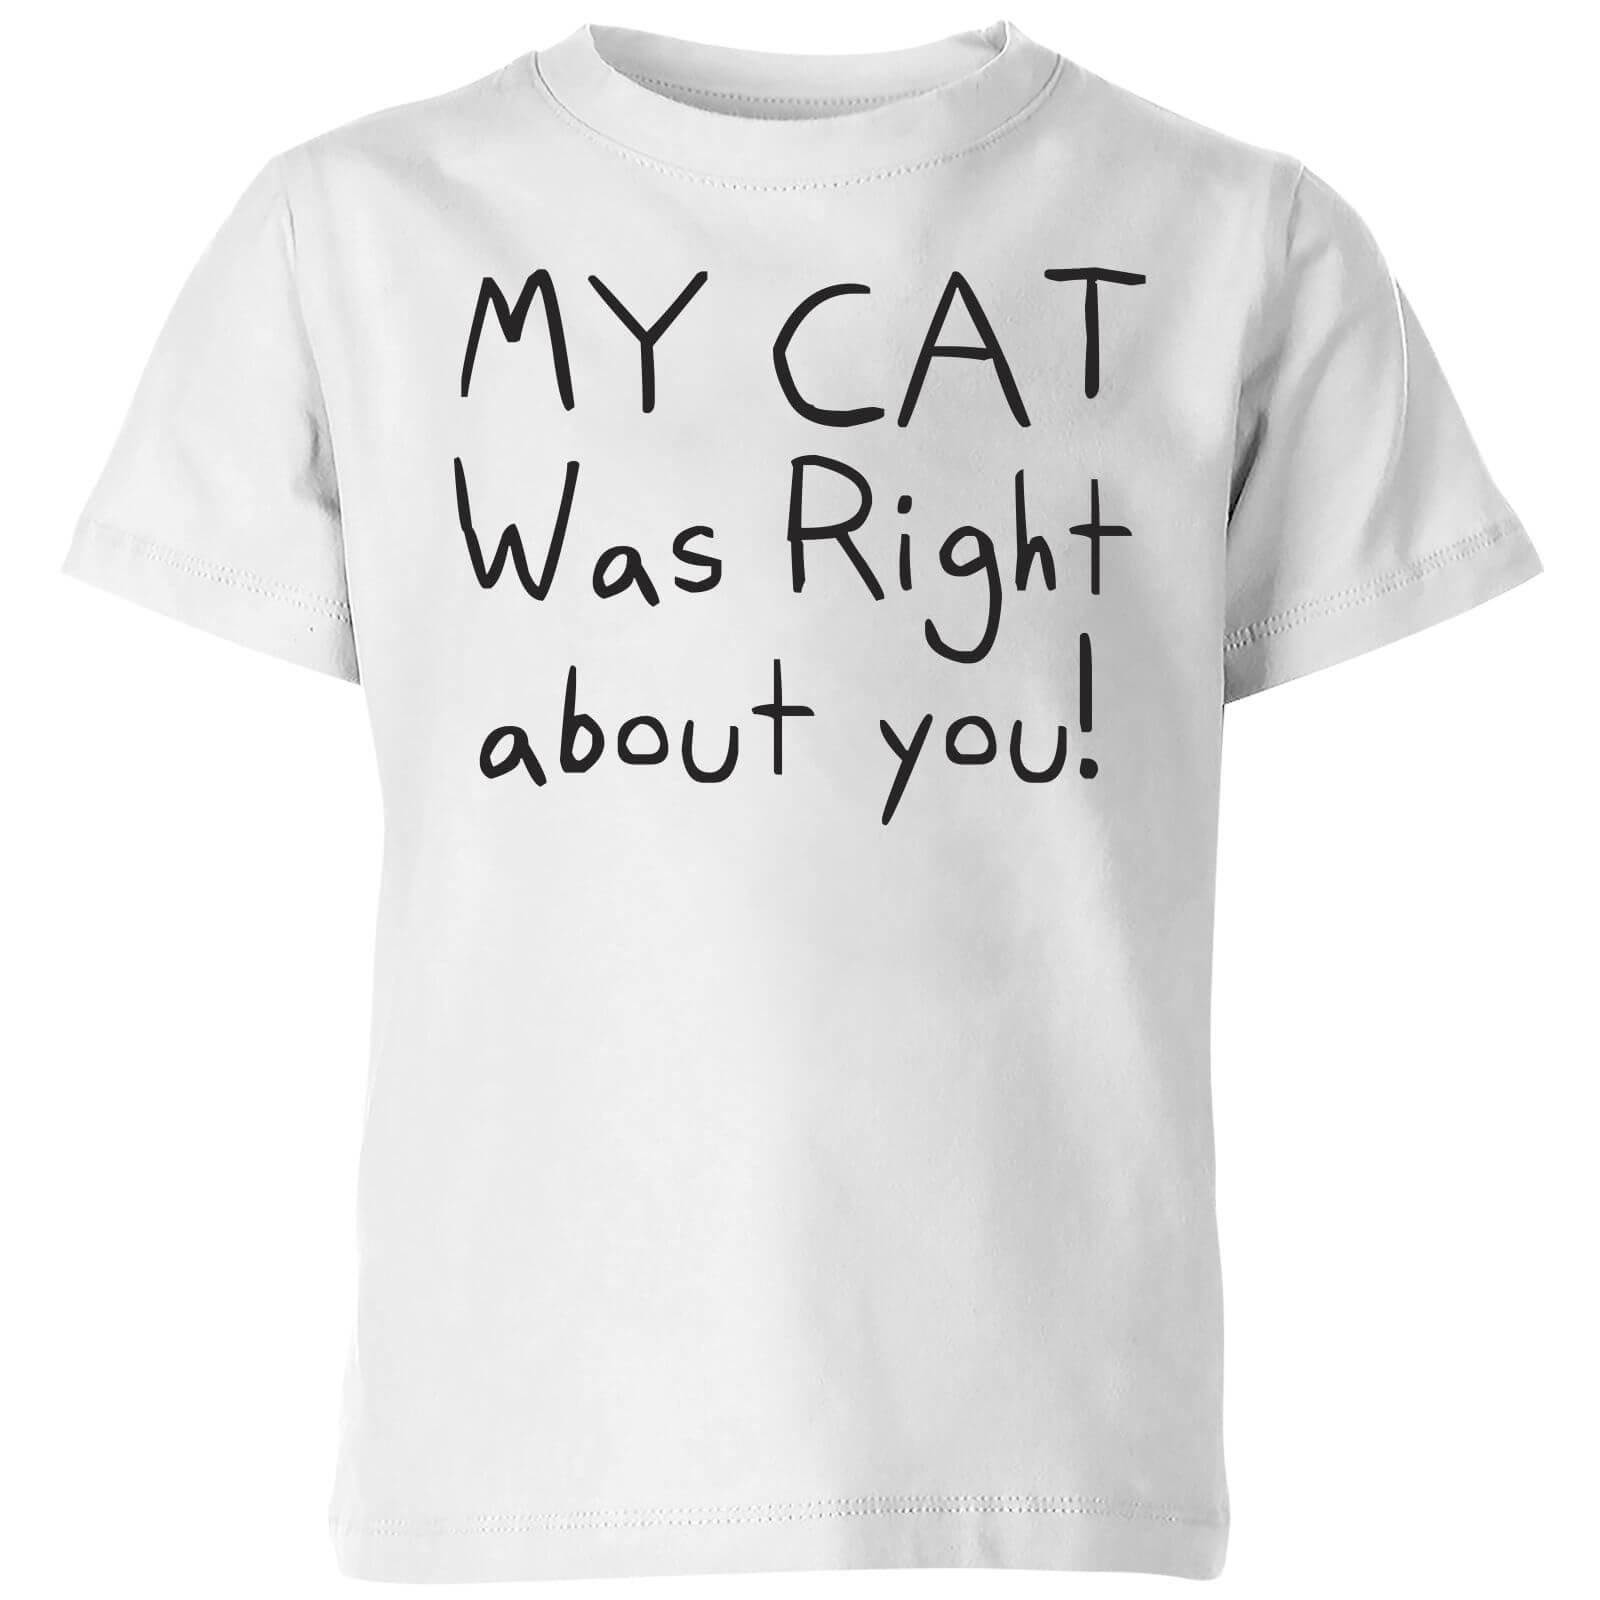 My Cat Was Right About You Kids' T-Shirt - White - 3-4 Years - White